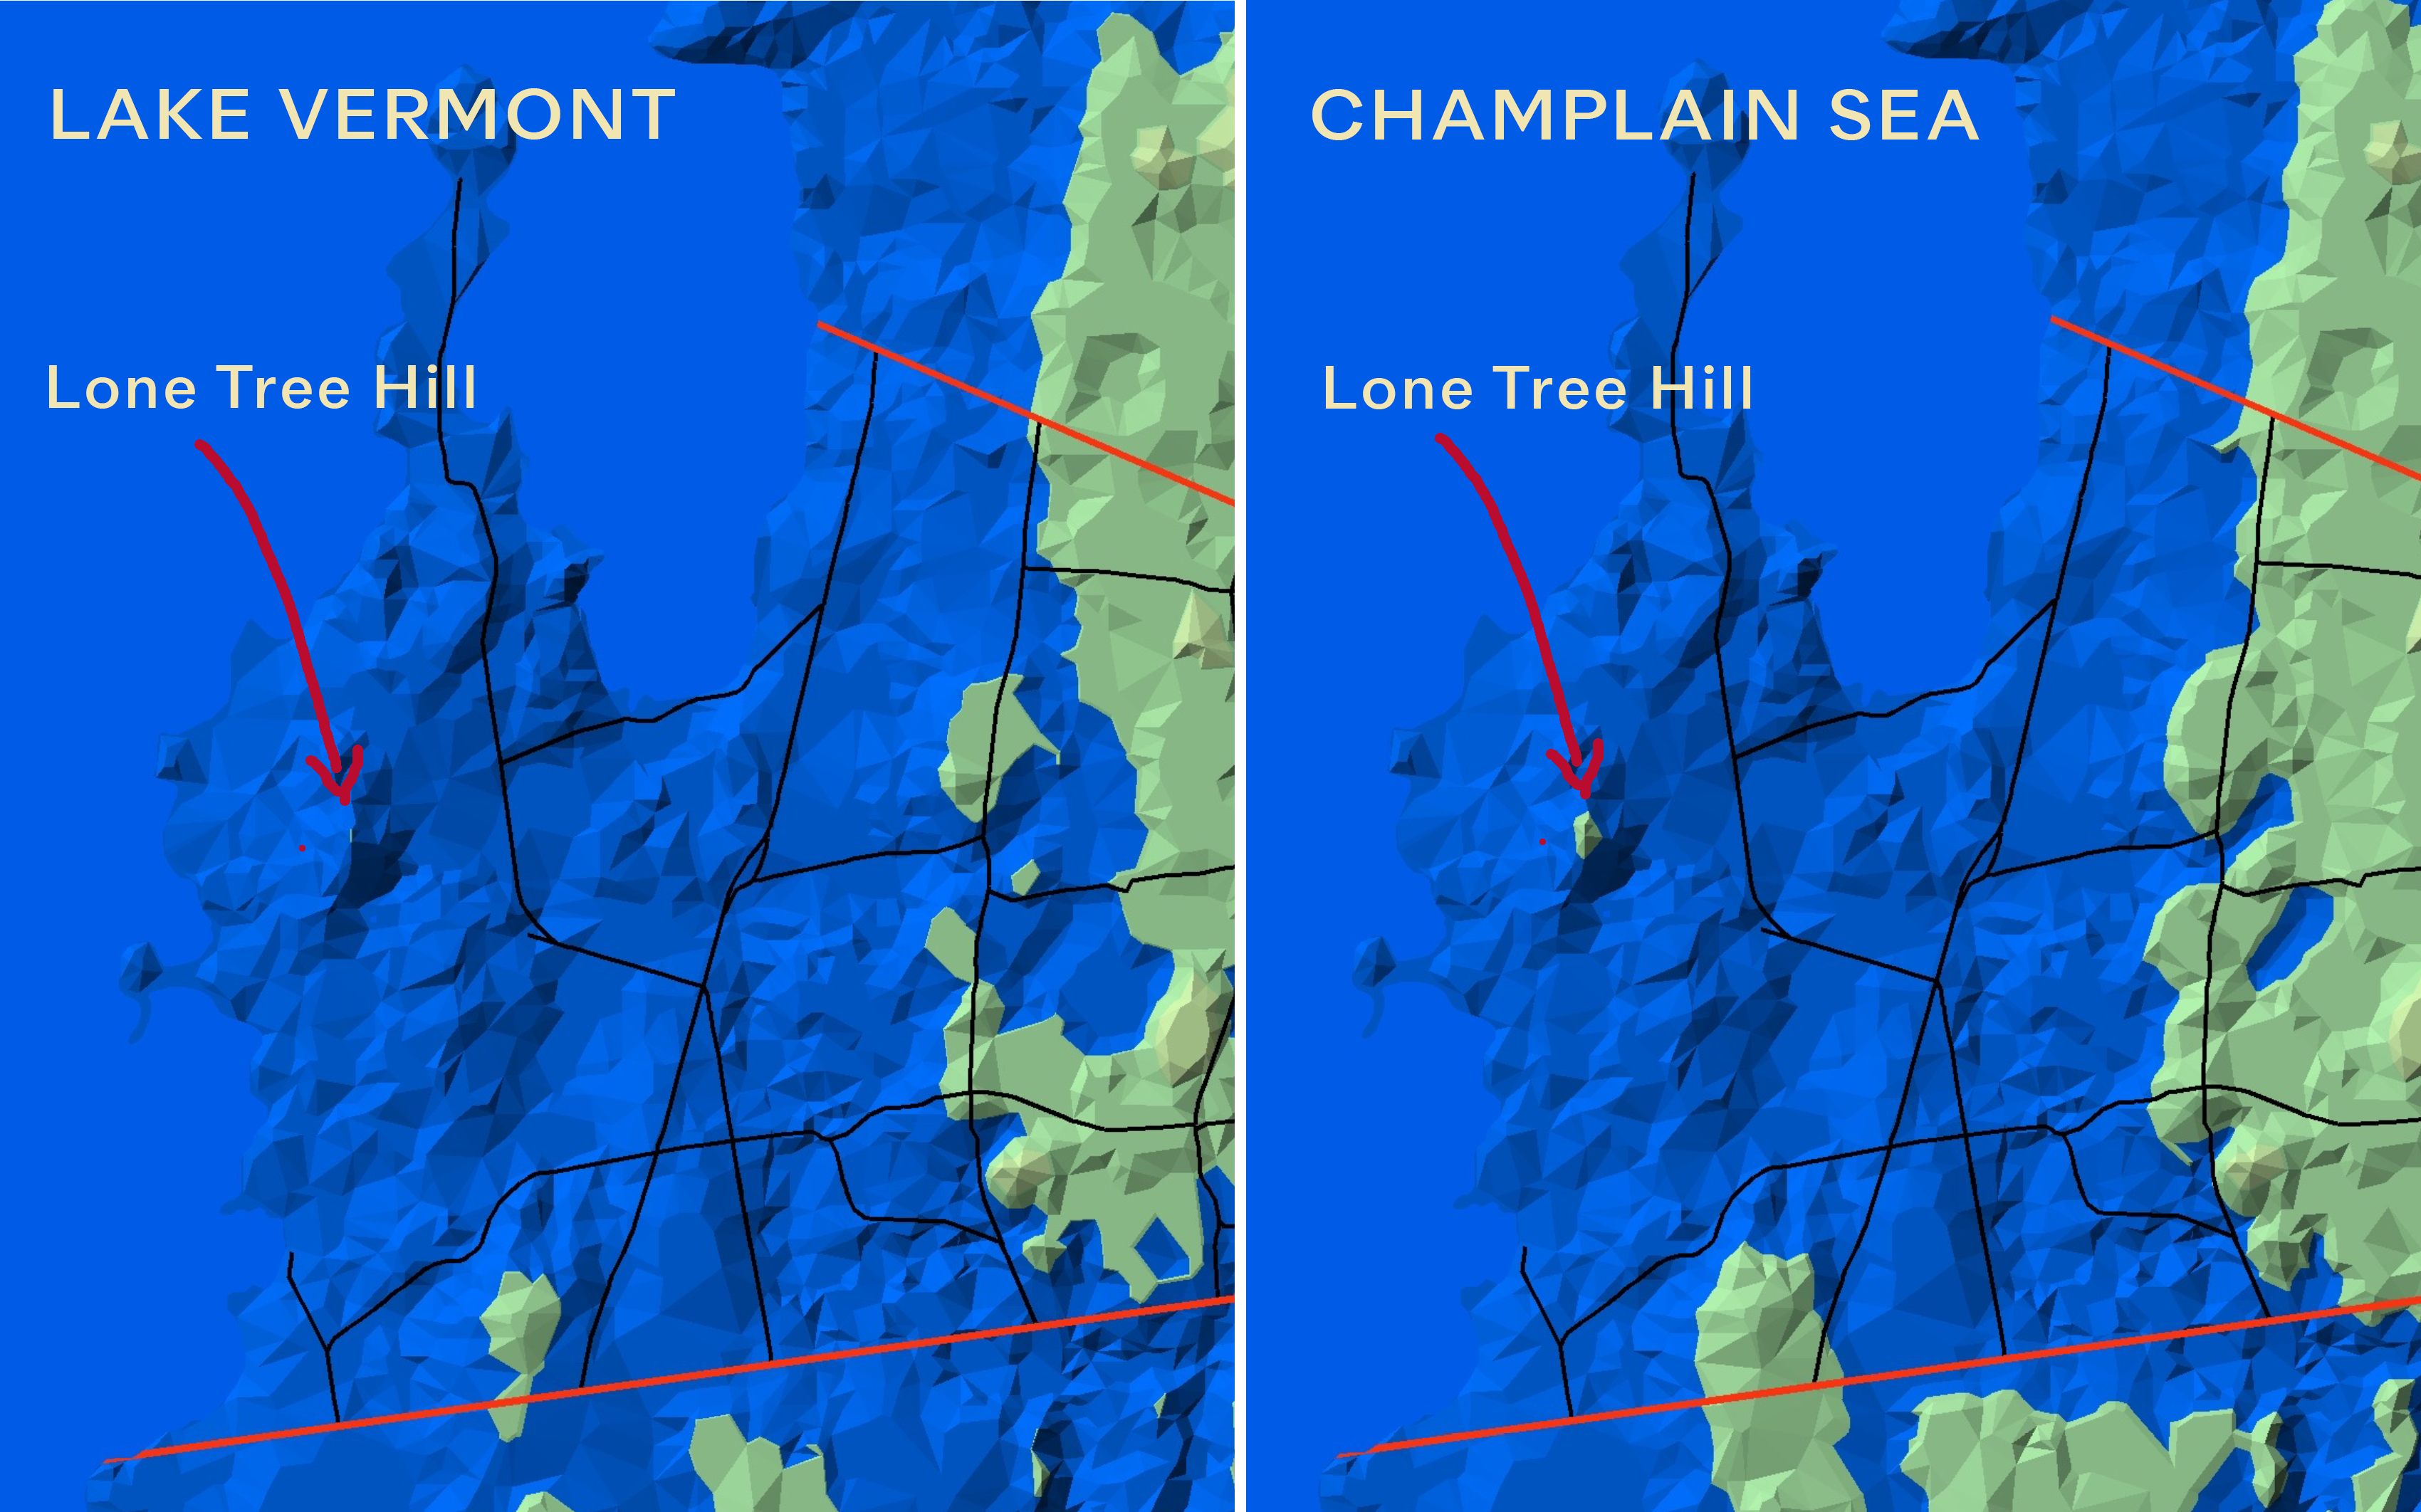 map showing historic shores of Lake Vermont and the Champlain Sea over land of Shelburne Farms